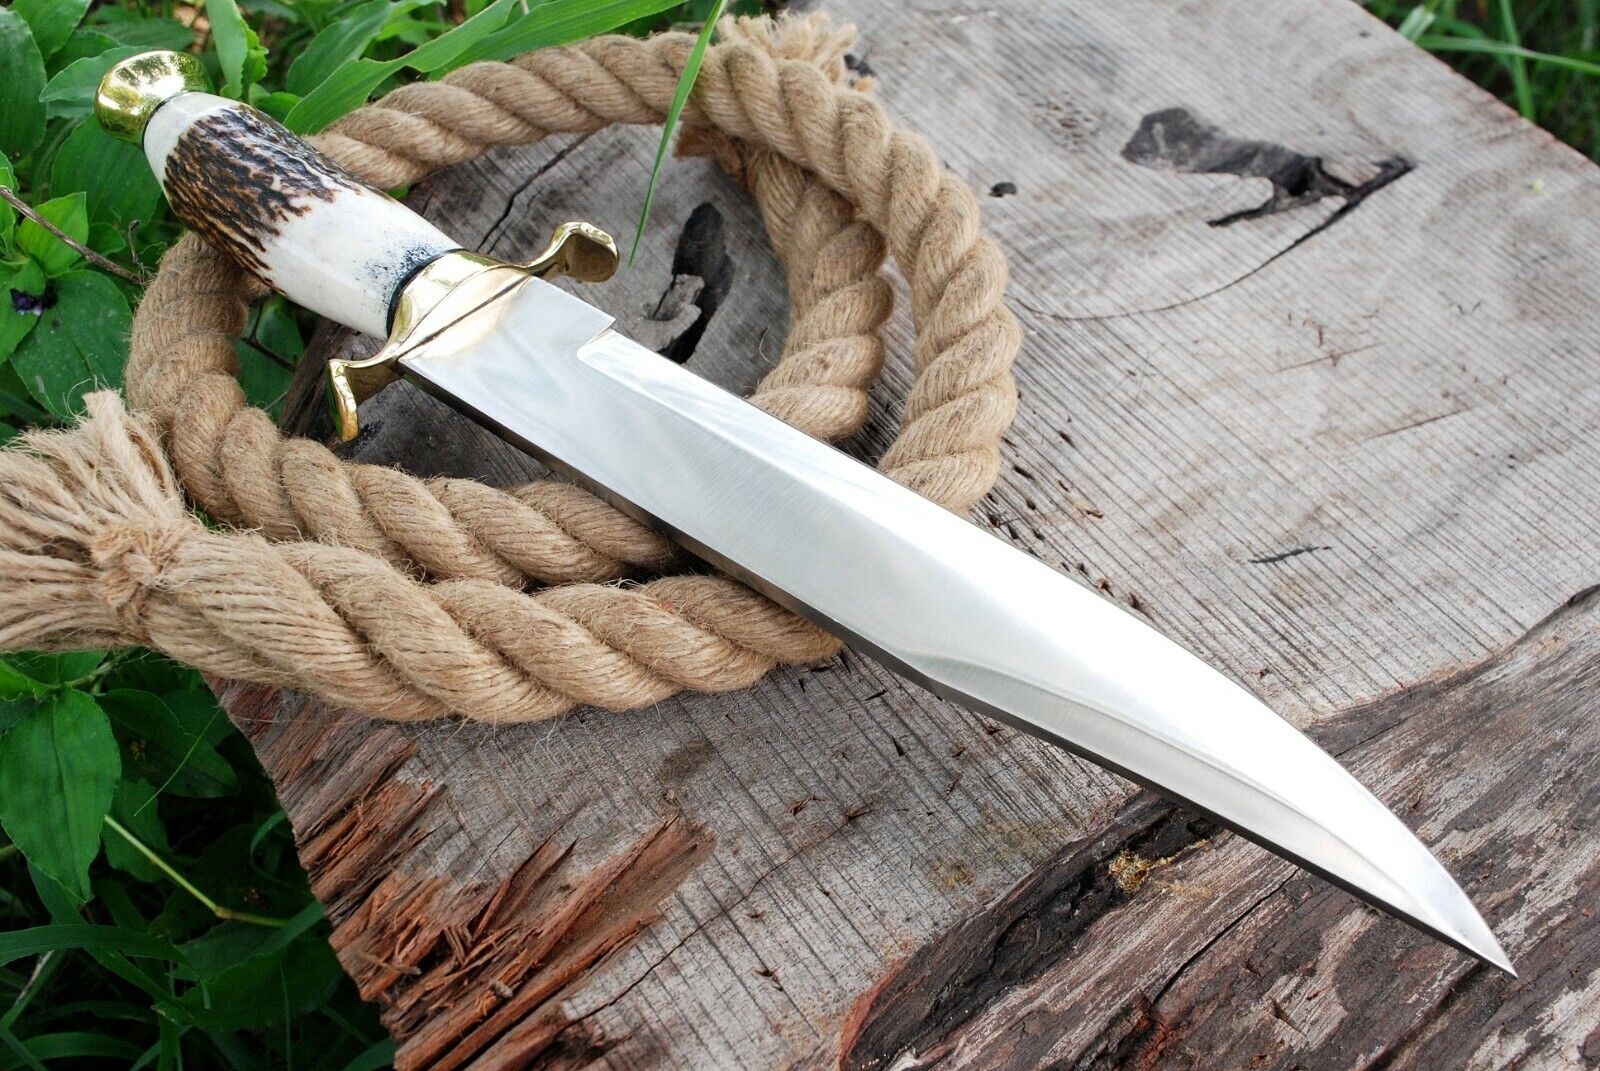 RARE OUTDOOR HANDMADE HUNT SURVIVAL FORGE BLADE TACTICAL BOWIE KNIFE ANTLER 